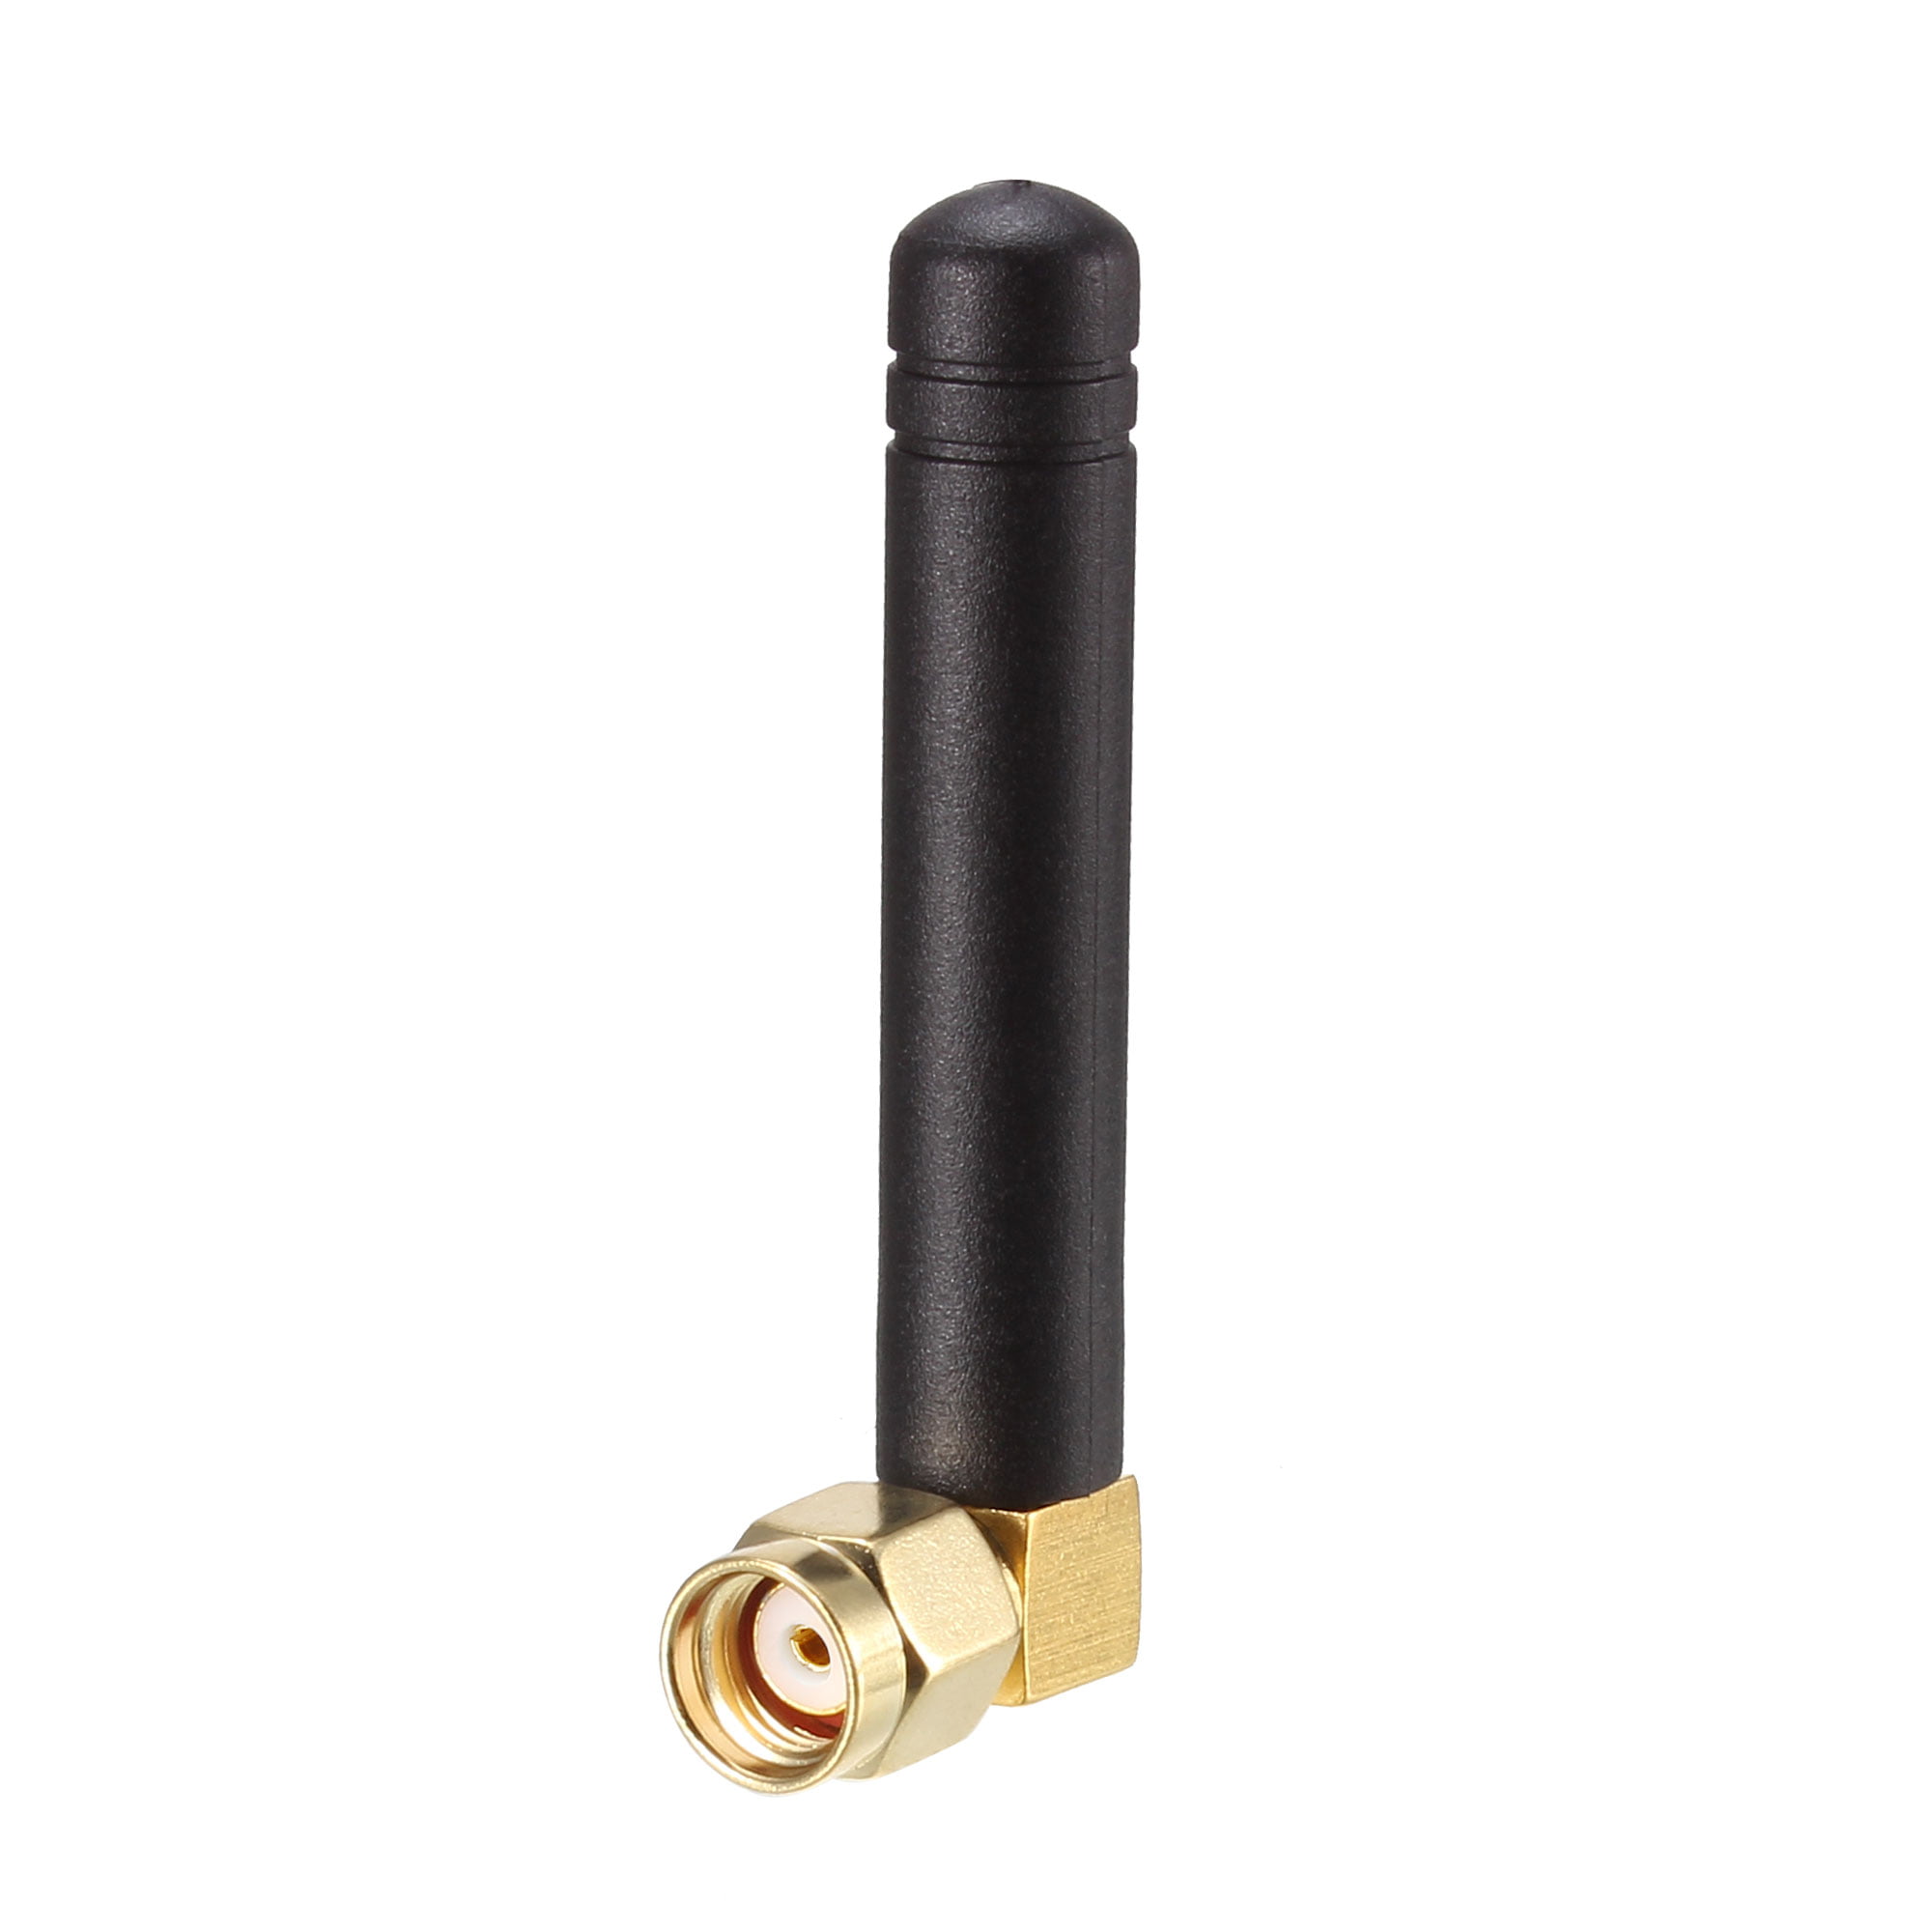 2.4GHz 8dBi Panel WiFi Antenna Directional RP-SMA Male Connector 